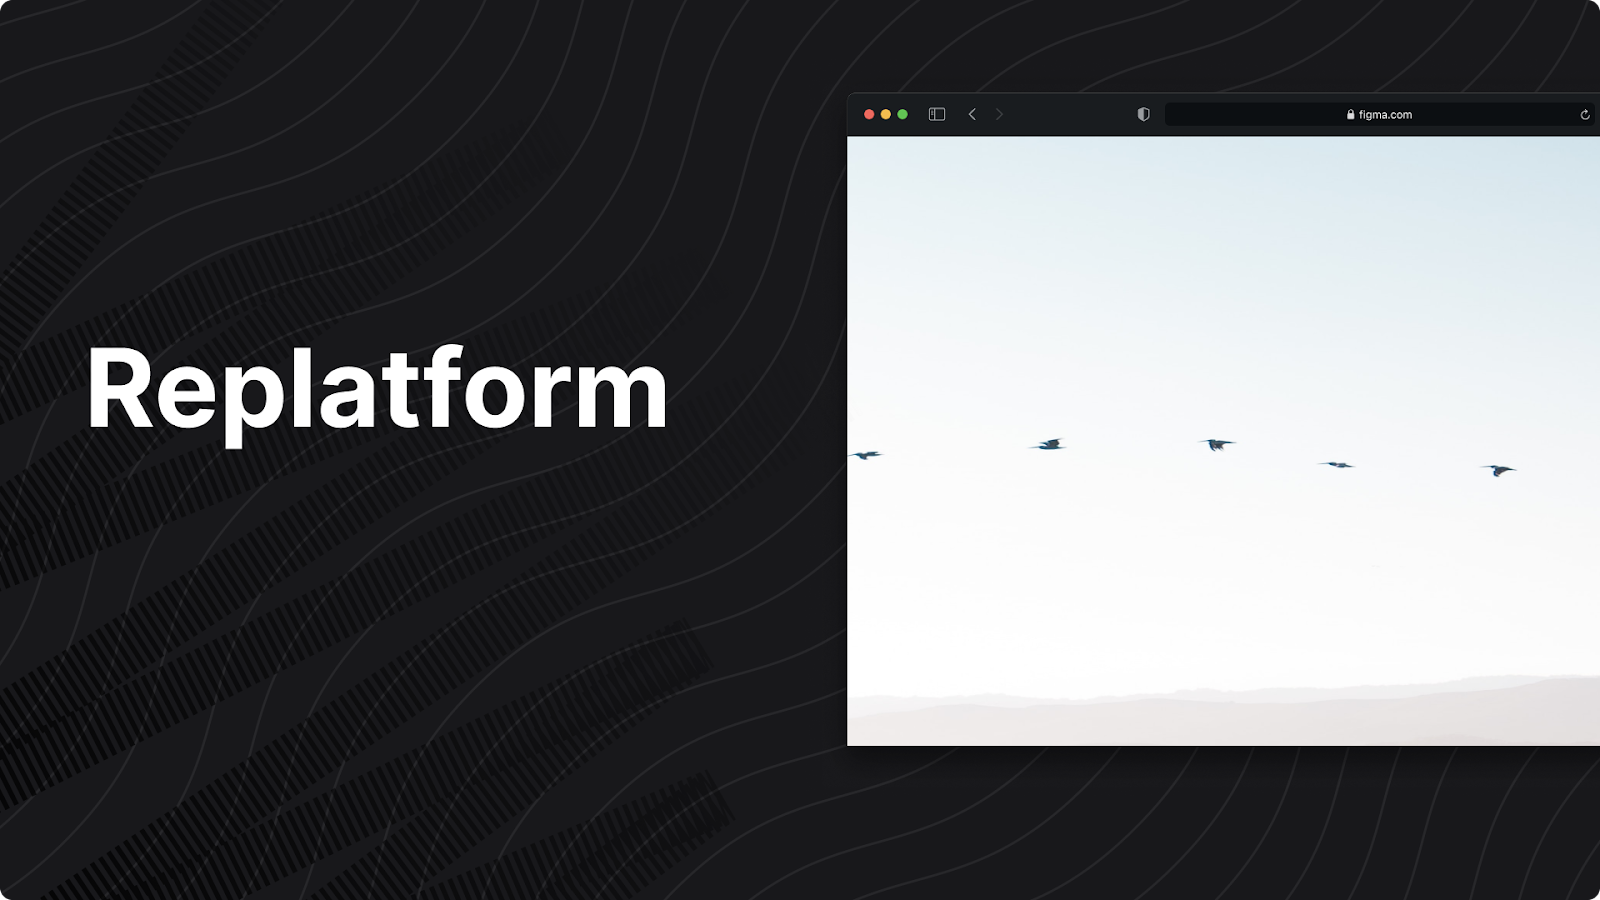 Replatform: Simplify Your eCommerce Launch with Expertly Crafted Pre-Built Landing Pages